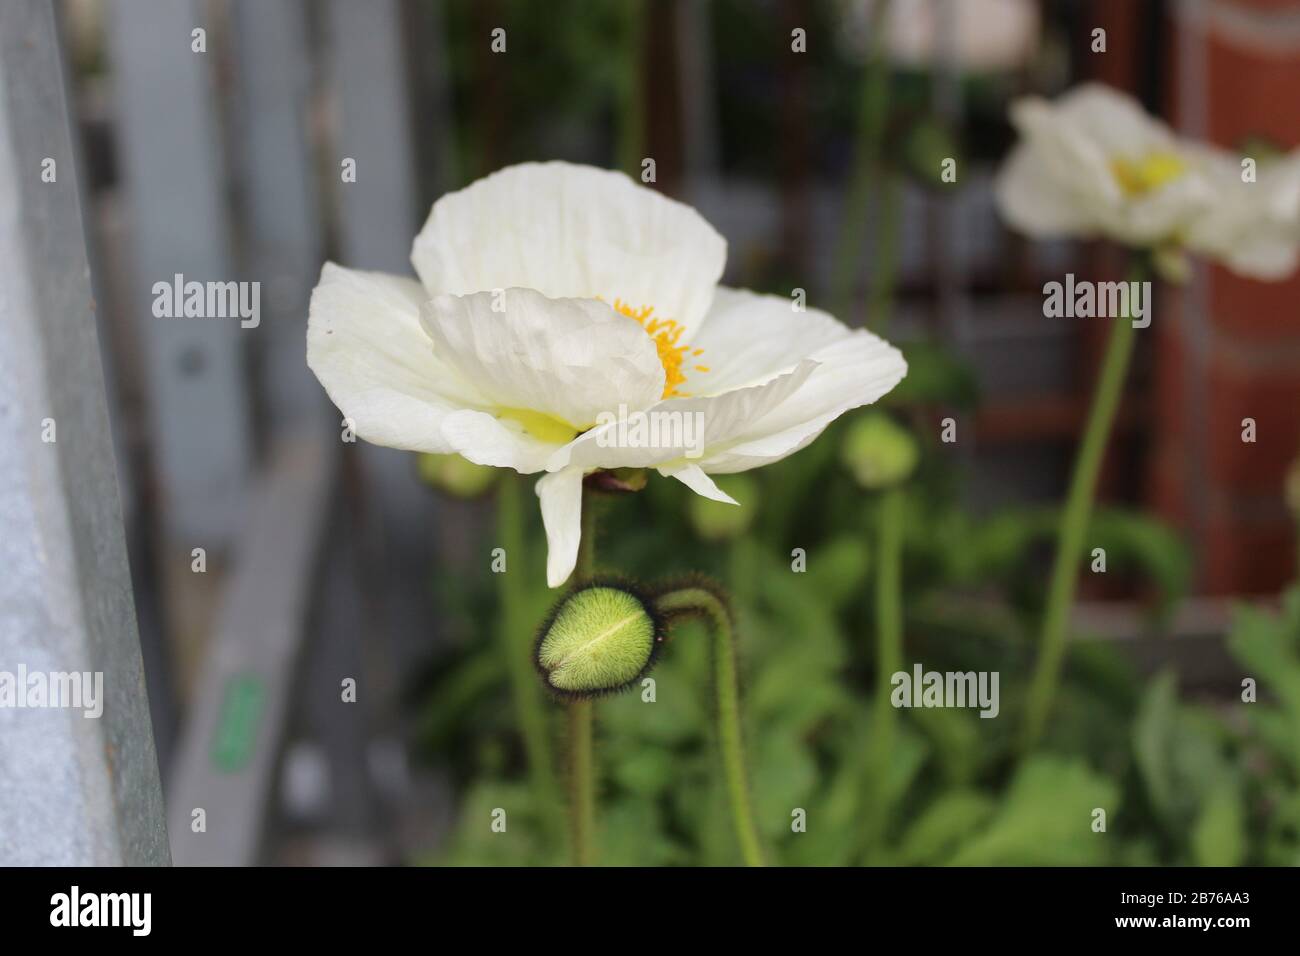 The picture shows icelandic poppy in the garden Stock Photo